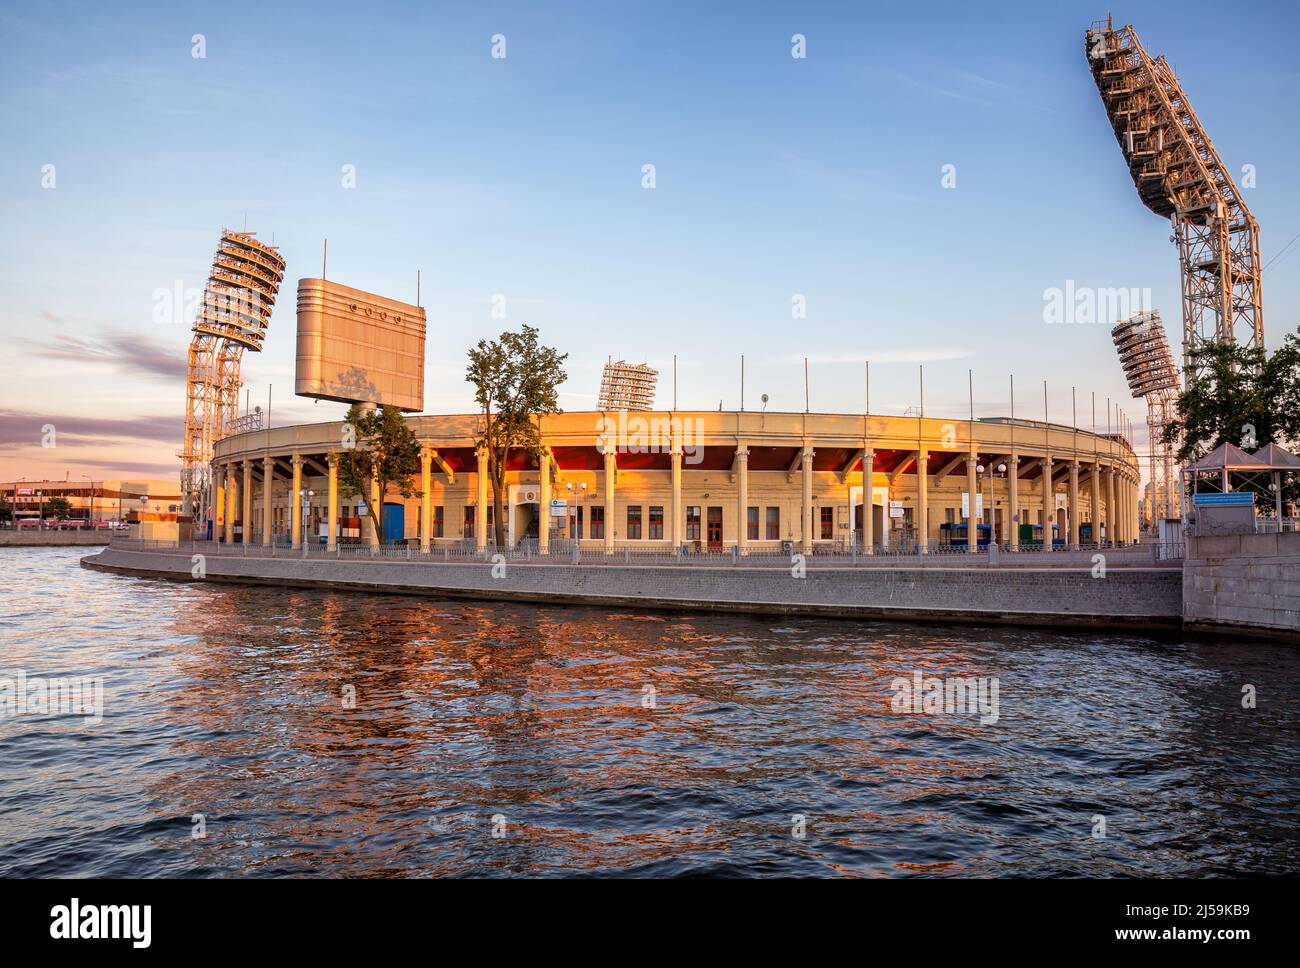 St. Petersburg, Russia - July, 2018: Petrovsky stadium on Petrovsky island, view from the Zhdanovka river Stock Photo